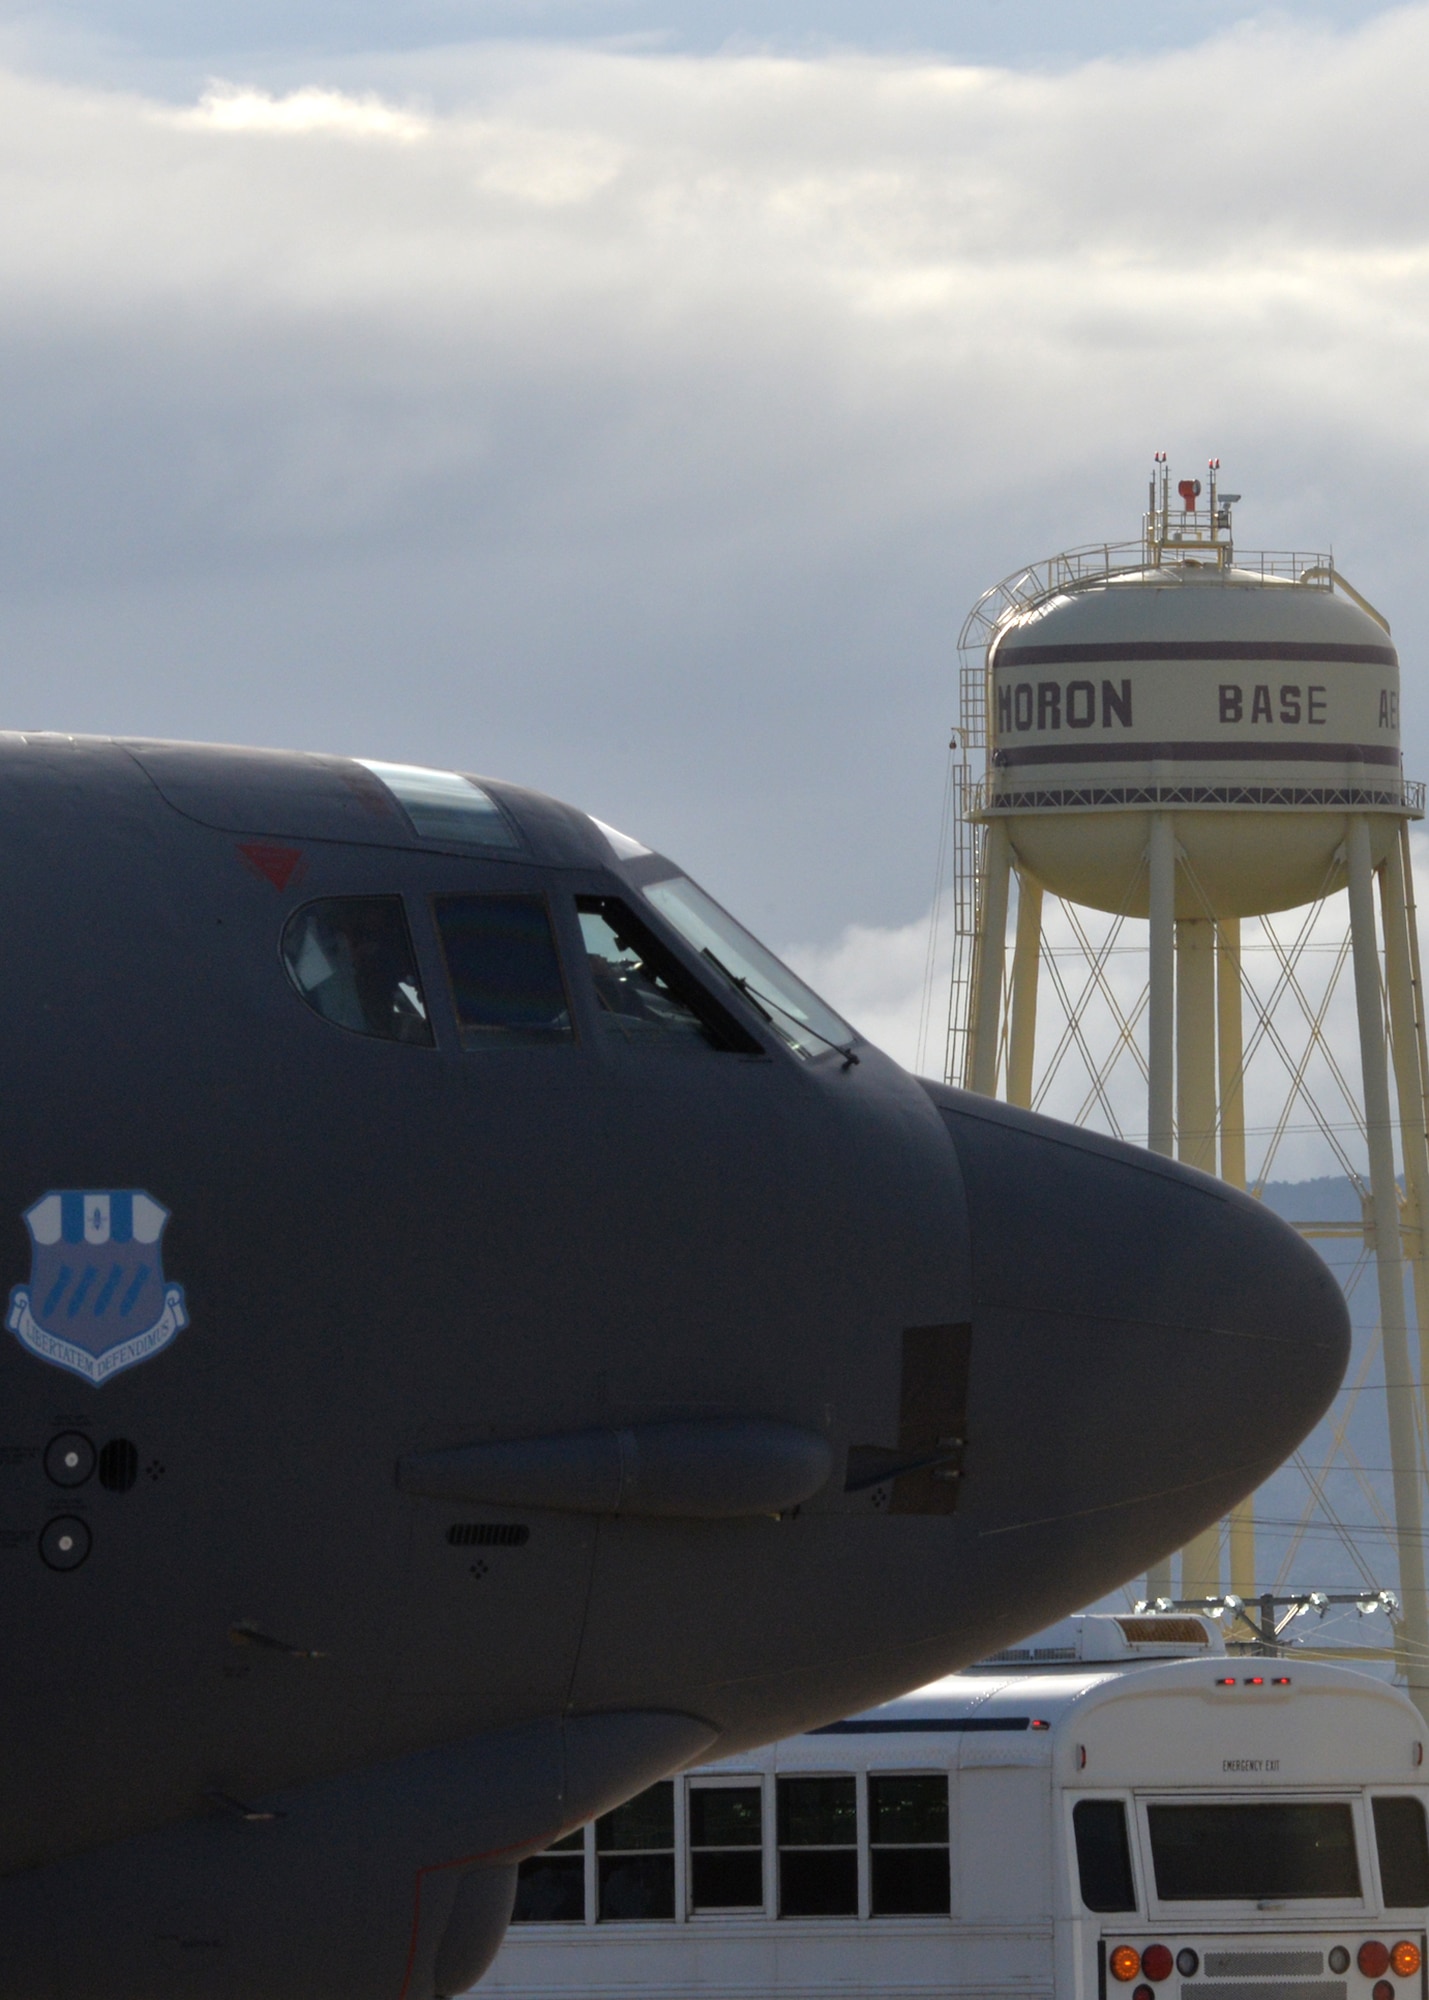 A B-52 Stratofortress sits on the ramp at Morón Air Base, Spain, after recently arriving from Barksdale Air Force Base, La., Feb. 27, 2016. Three B-52s will participate in Cold Response 16, a large-scale NATO military exercise involving maritime, ground and air operations. The exercise’s location in the Trøndelag region of Norway will provide an extreme-cold environment in which a dozen allied and partner nations will jointly develop tactics, techniques and procedures. (U.S. Air Force photo/Senior Airman Joseph Raatz)